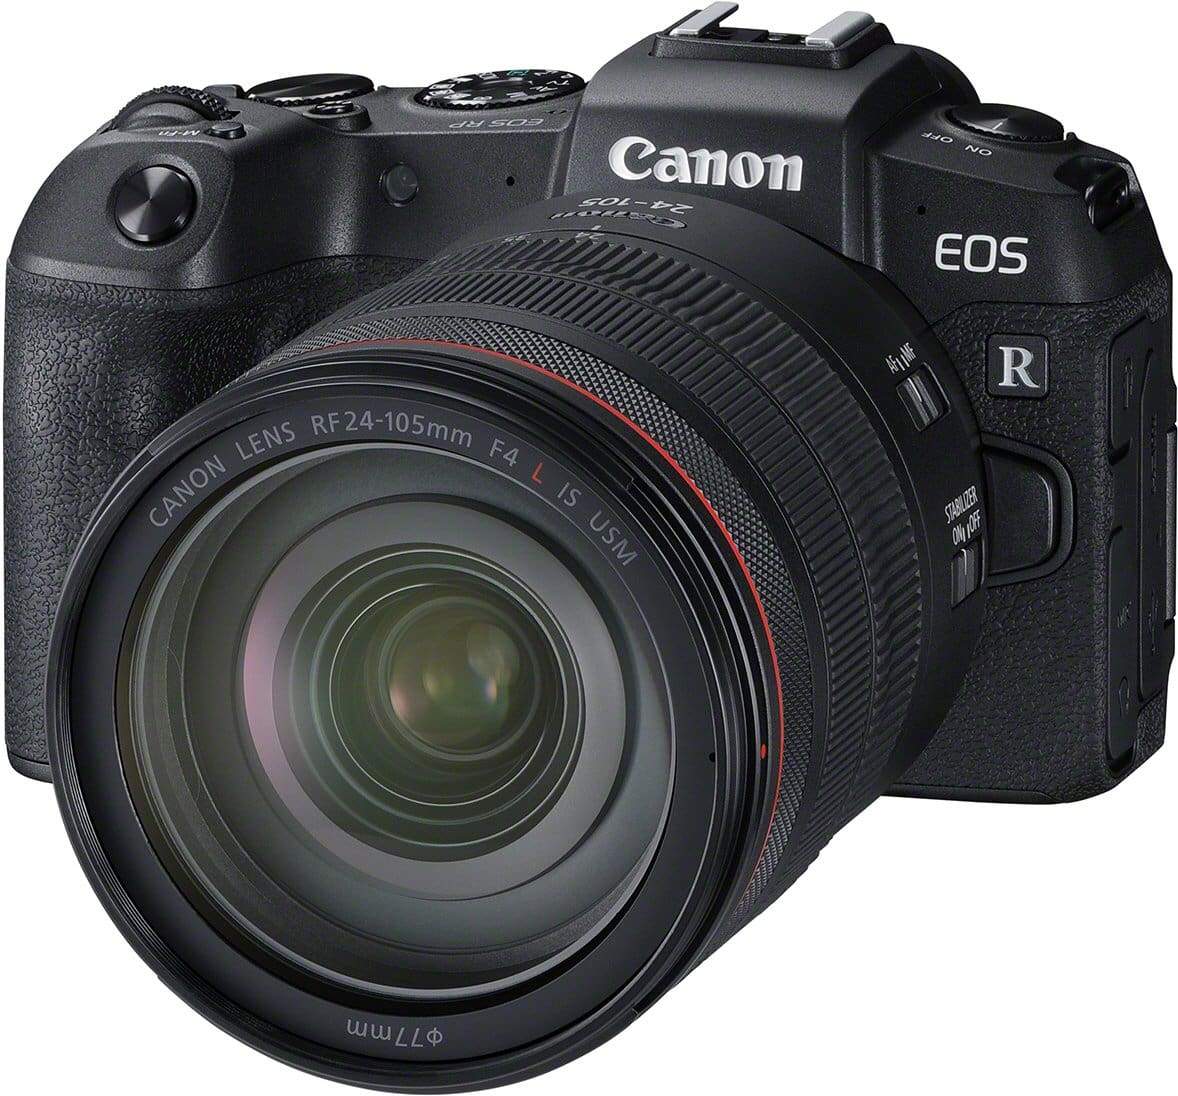 Step into the creative world of EOS R: Canon launches the compact, full frame EOS RP Cameratek